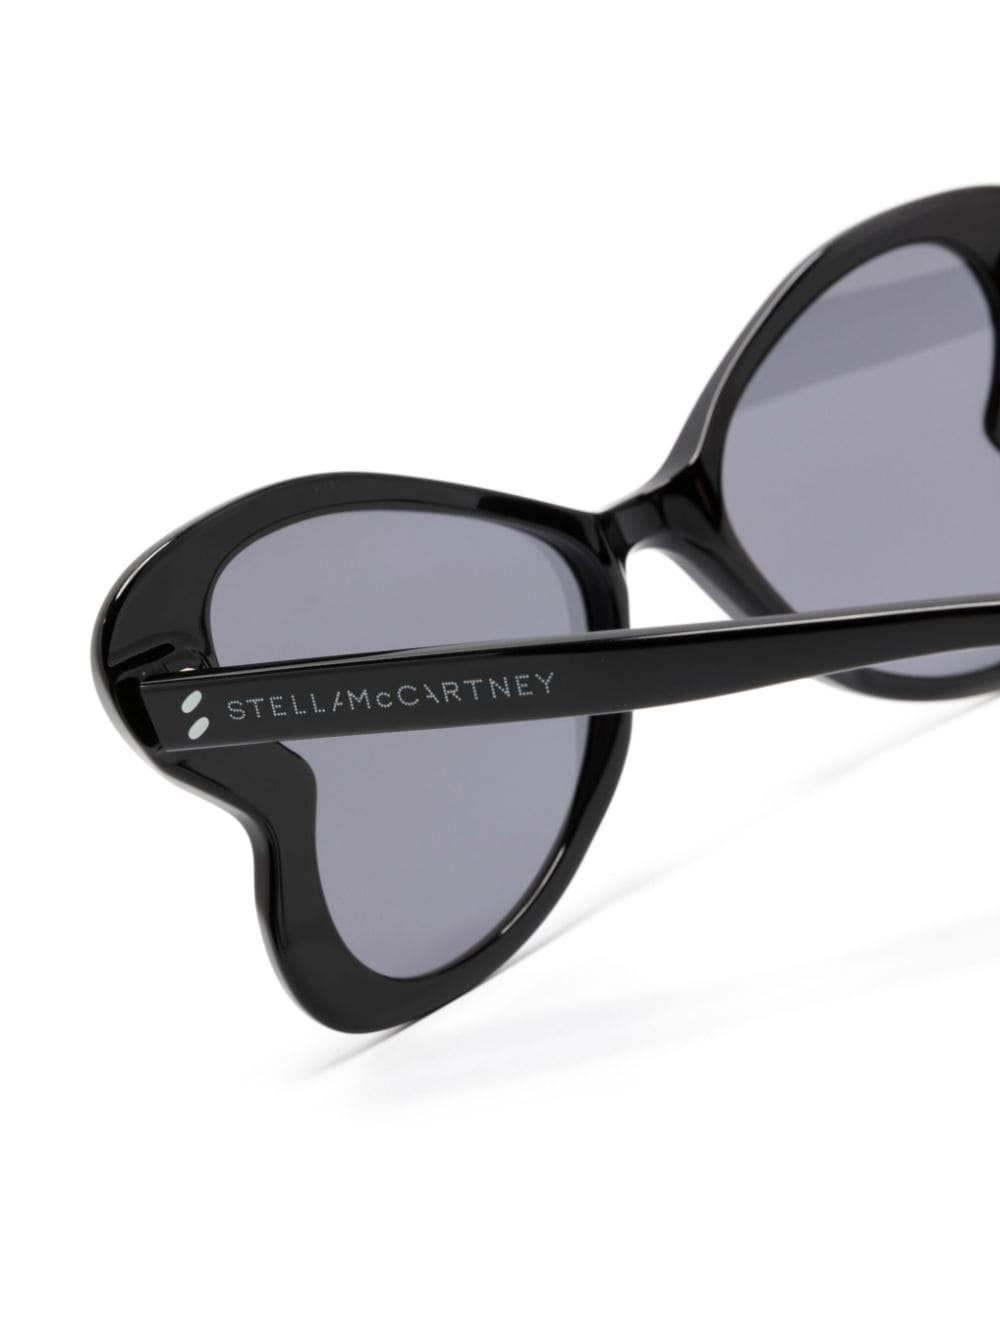 butterfly-frame sunglasses - 3